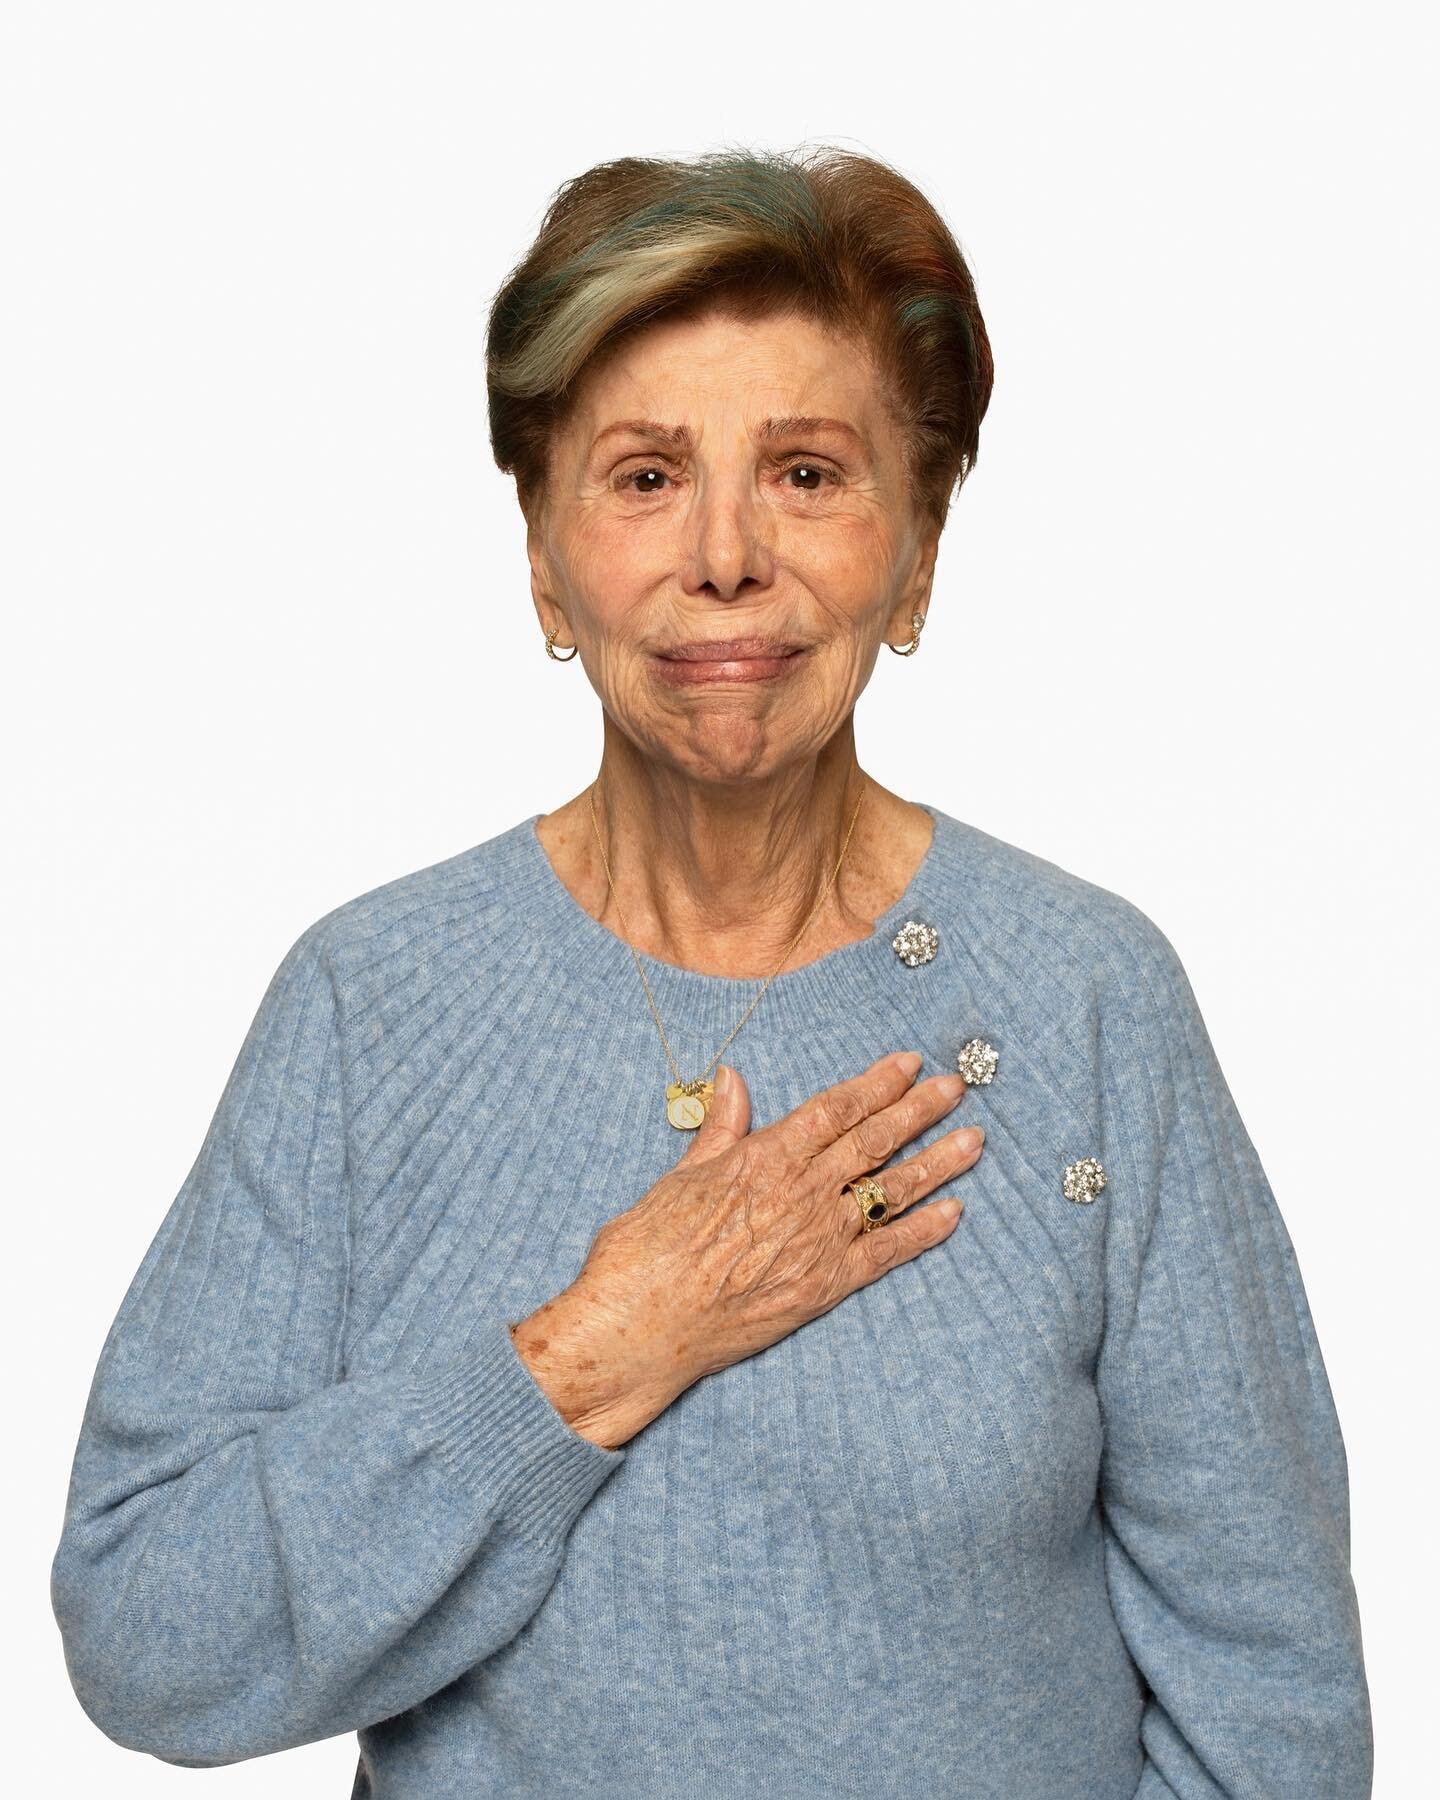 Faye Tzippy Holland, 83, Holocaust Survivor

-

&quot;I was born in a labor camp in Siberia in 1940. We lived under terrible conditions. It was freezing. There was no food, no milk. I got typhus there. I don&rsquo;t know how I survived that. After th